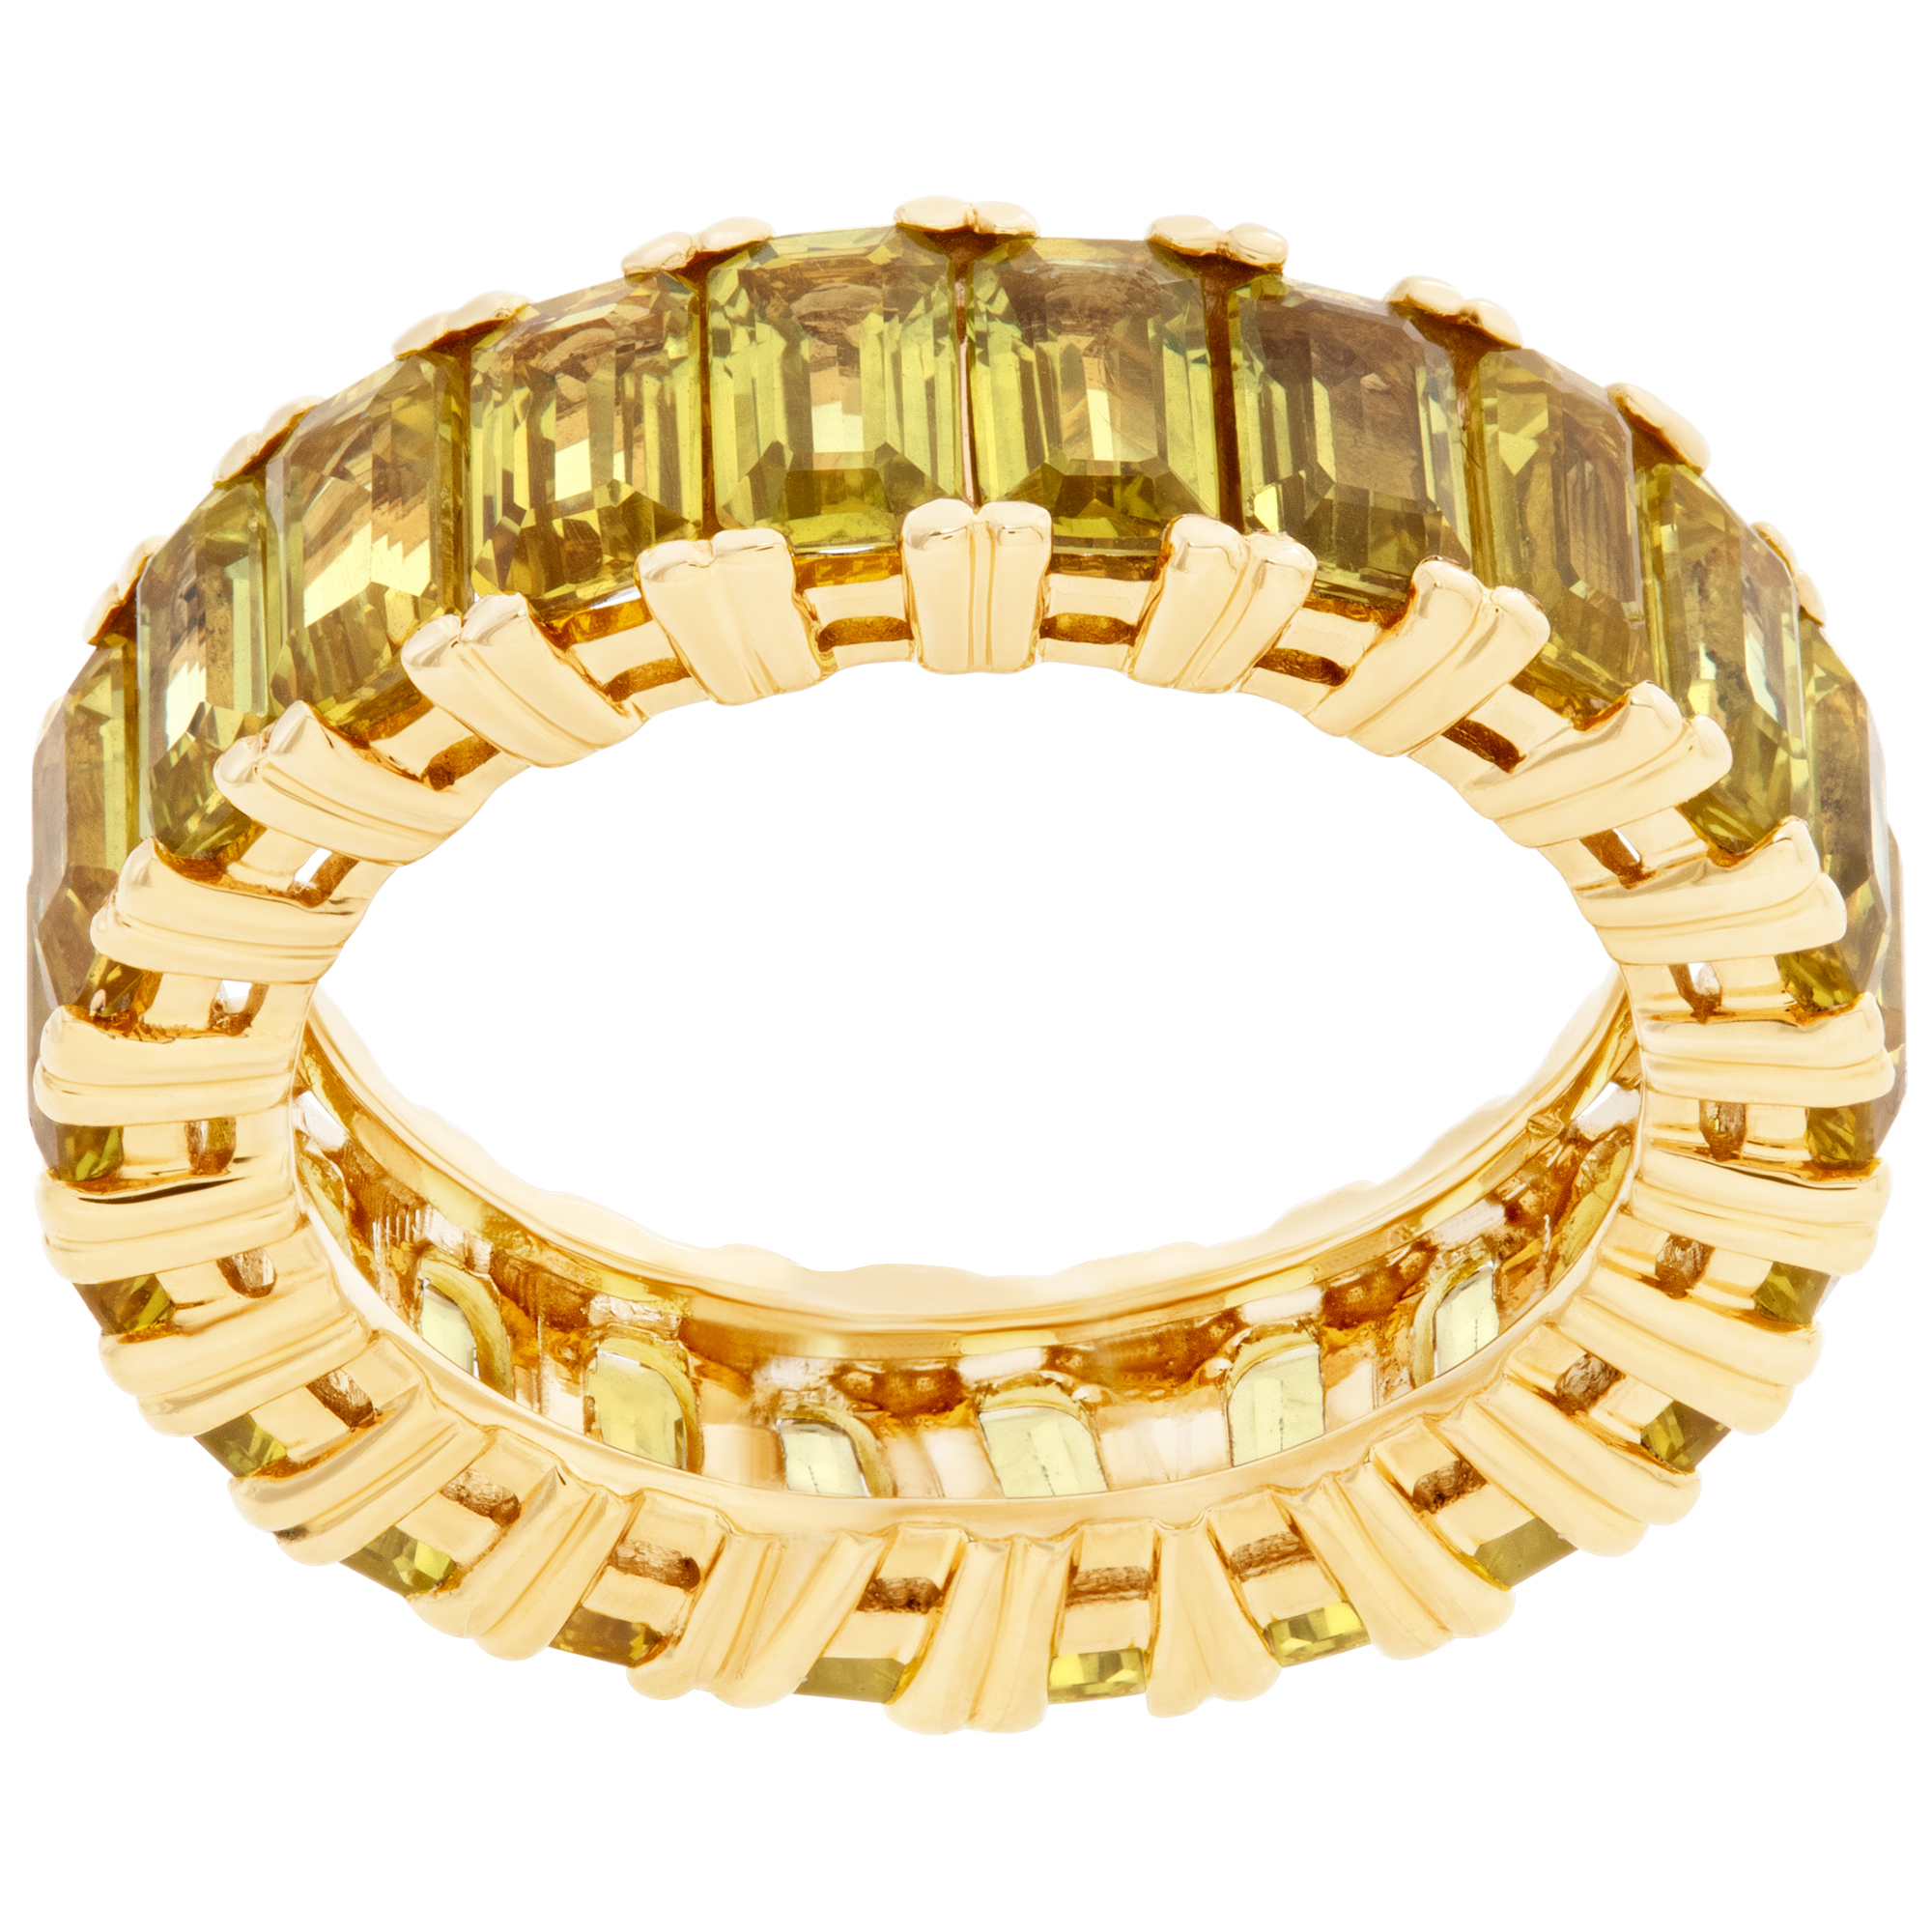 Yellow Sapphire eternity band set in 14k yellow gold image 1